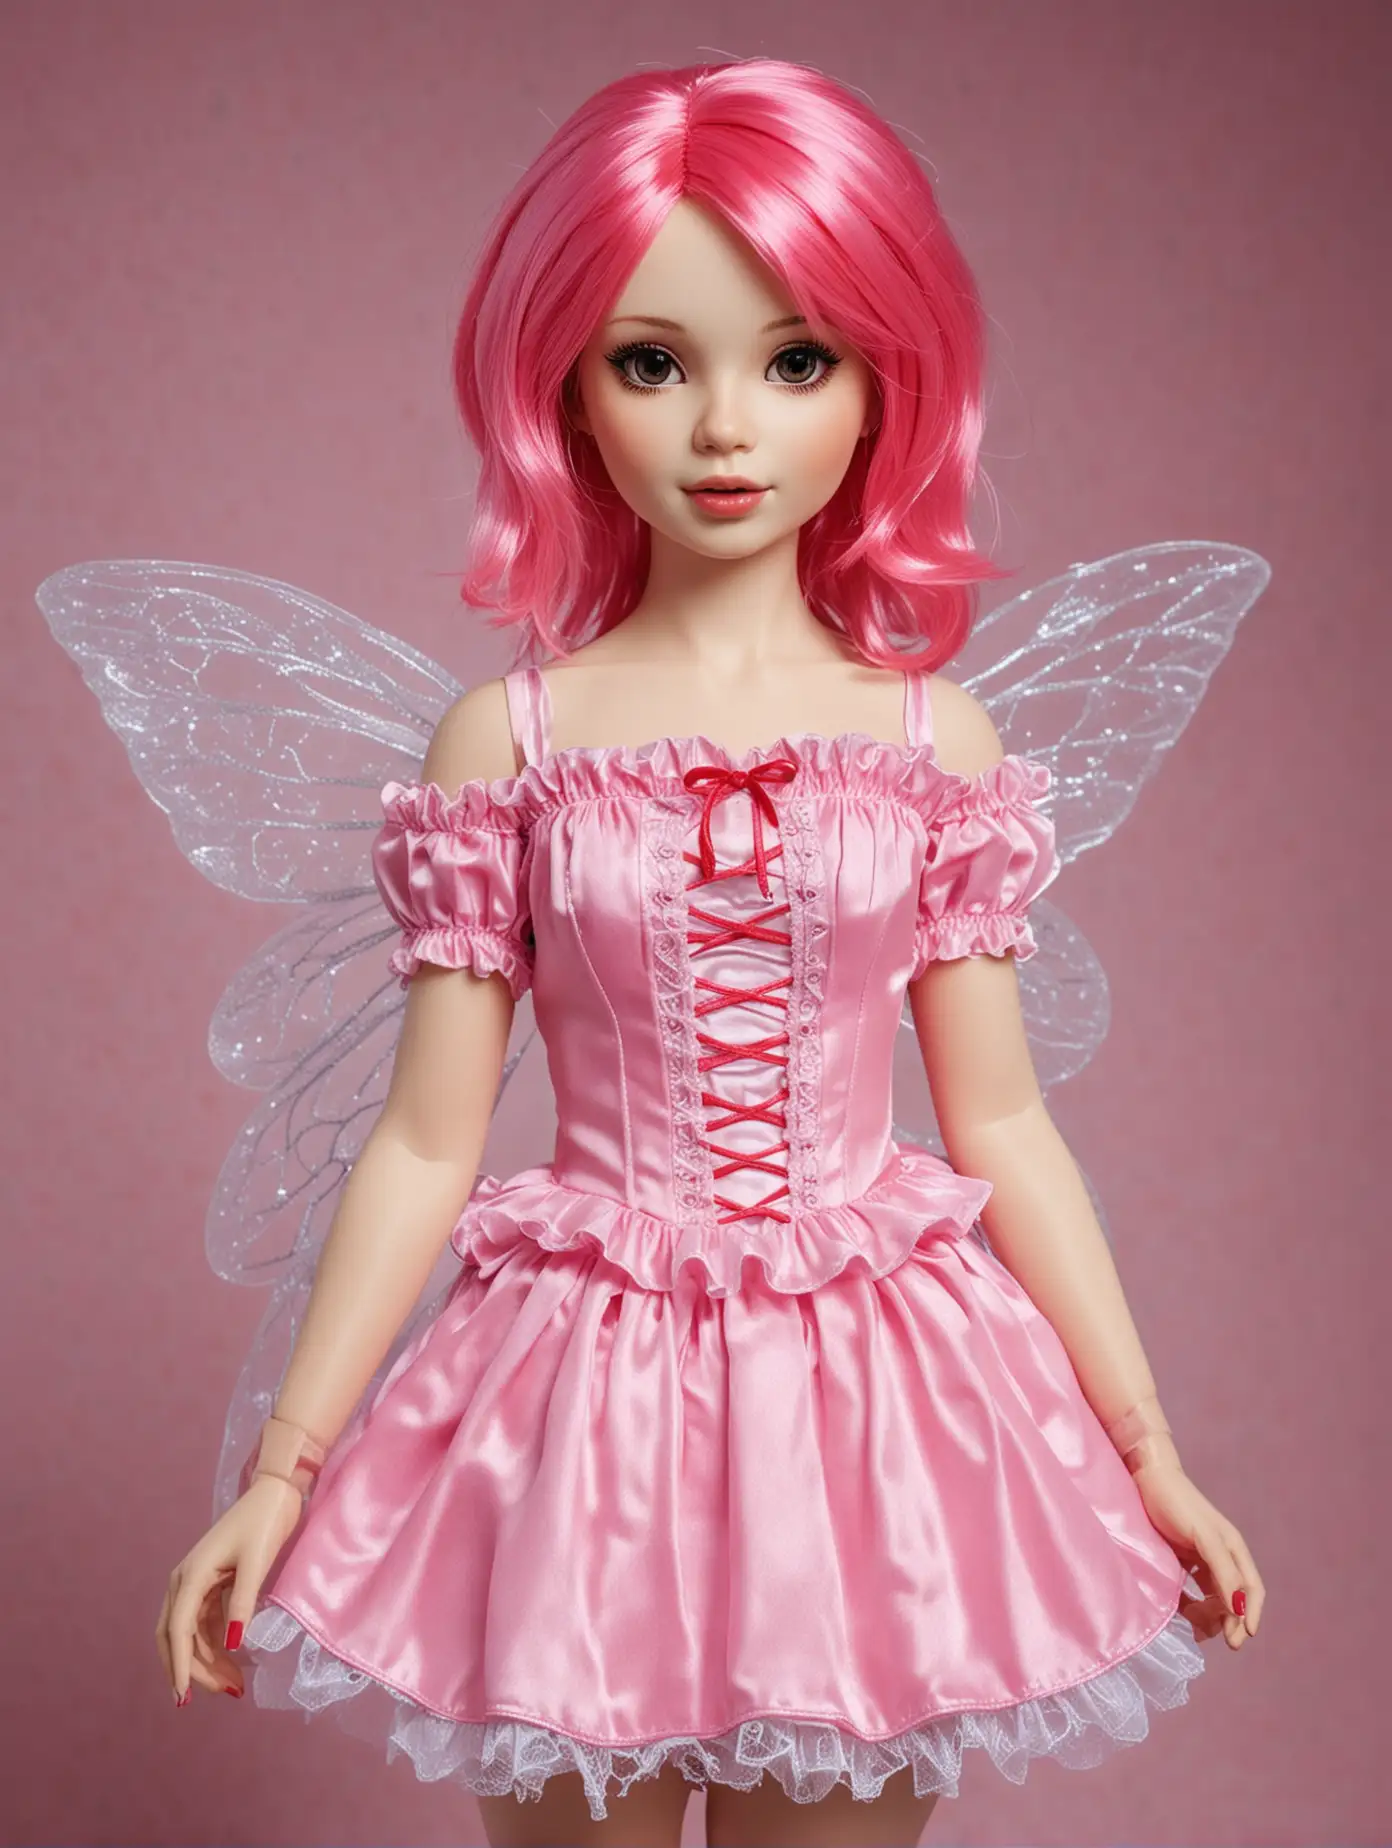 Beautiful female teenage doll, white skin, shoulder length pink hair, wearing a Fairy costume, red shoes,